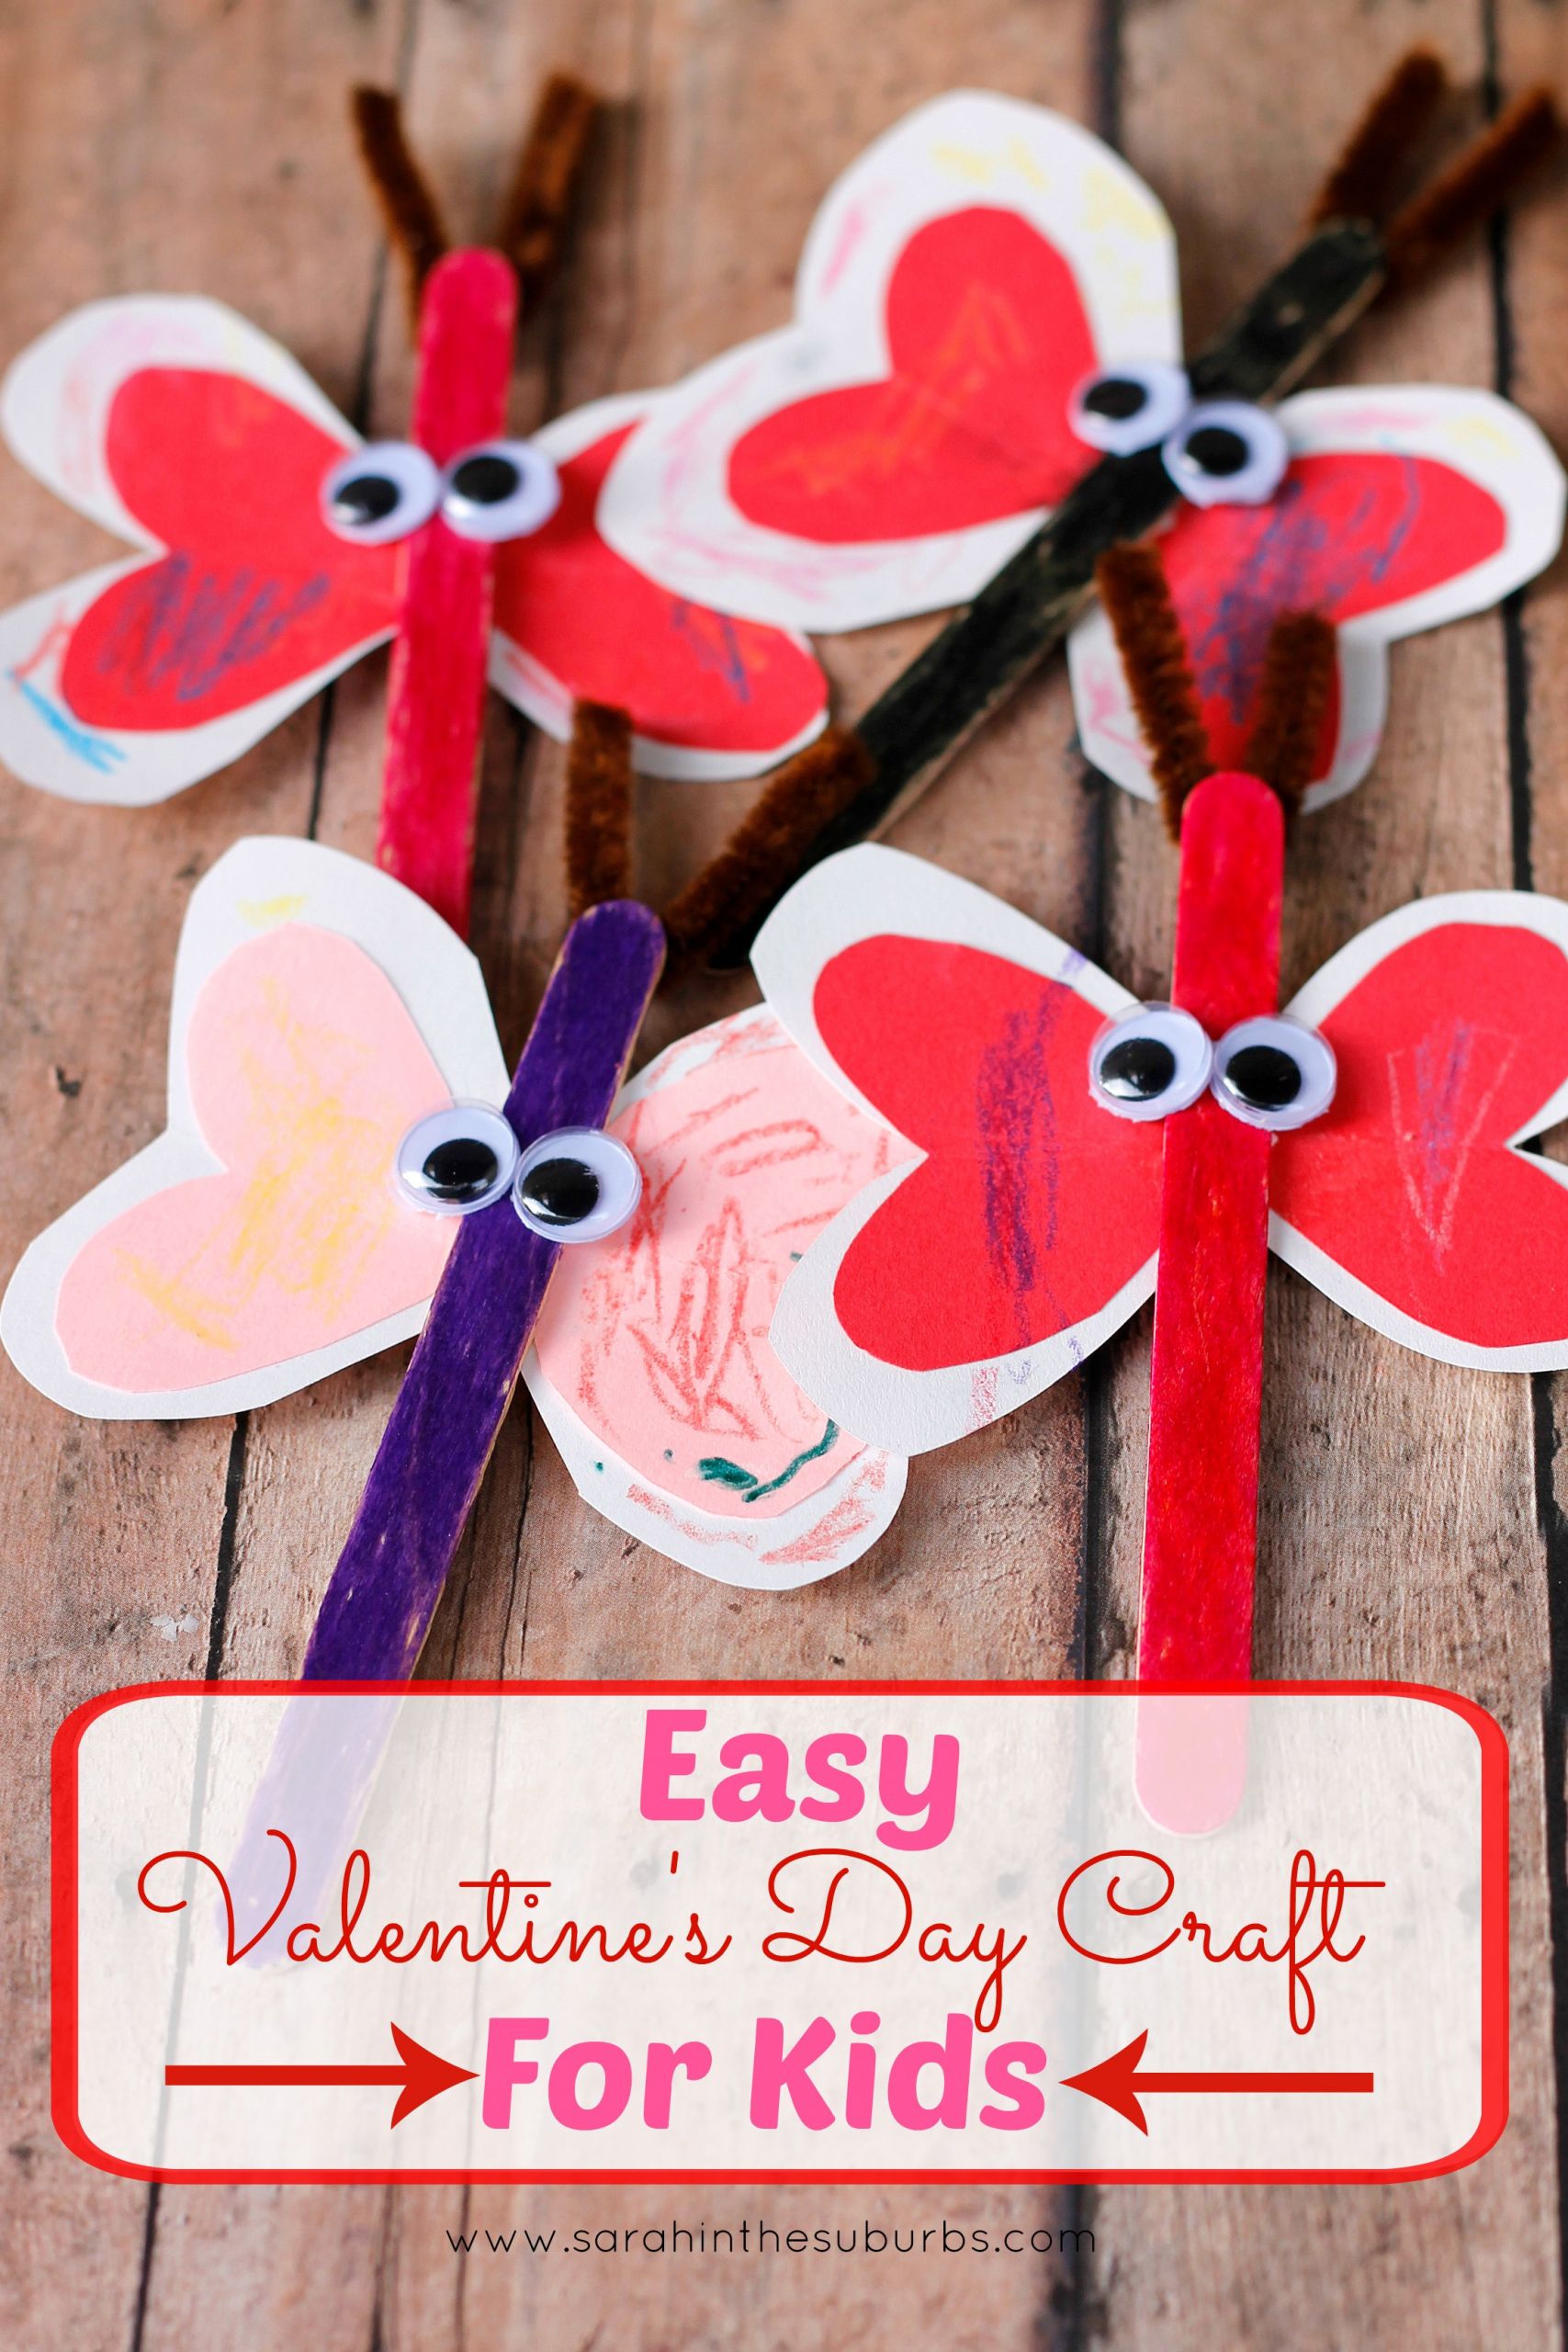 Valentine Craft Ideas For Toddlers
 Love Bug Valentine s Day Craft for Kids Sarah in the Suburbs